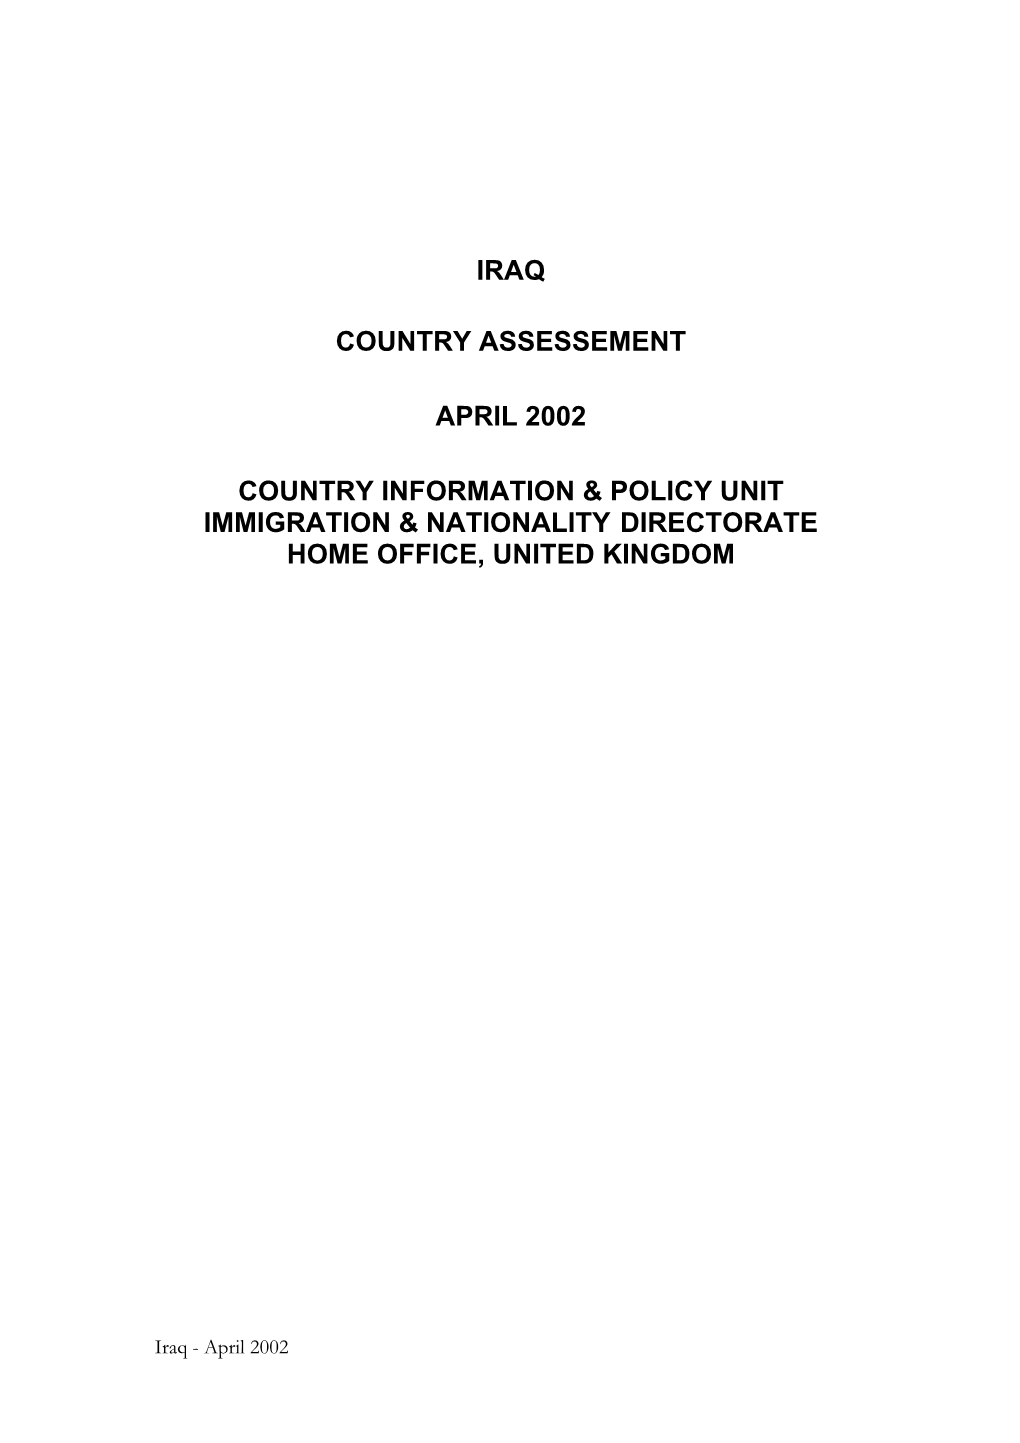 Iraq Country Assessement April 2002 Country